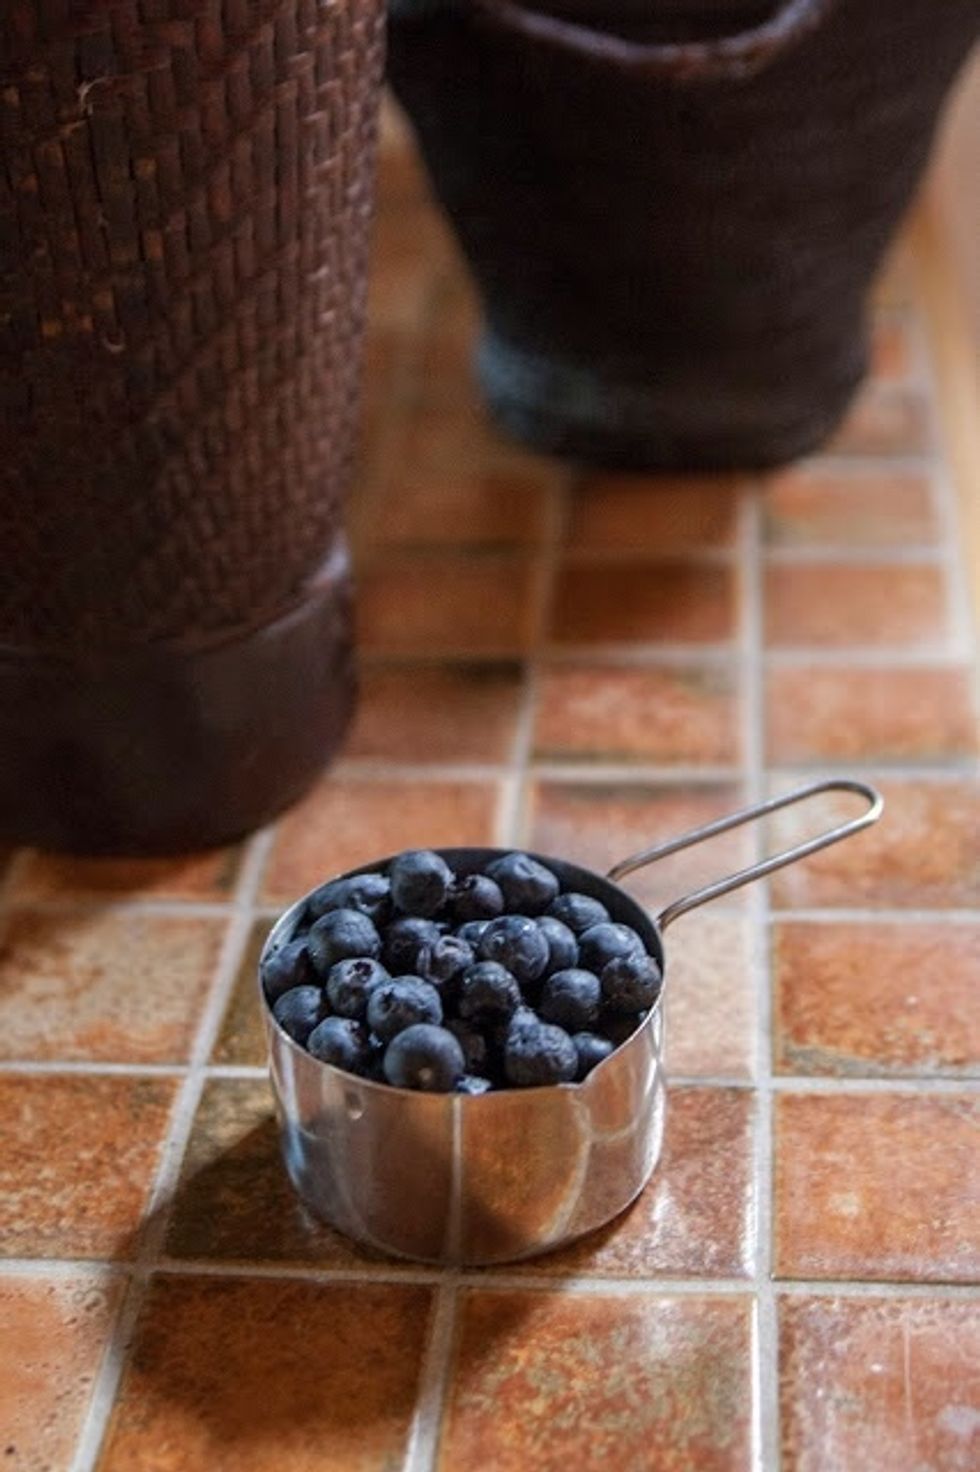 Rinse and dry the blueberries. Set them aside.